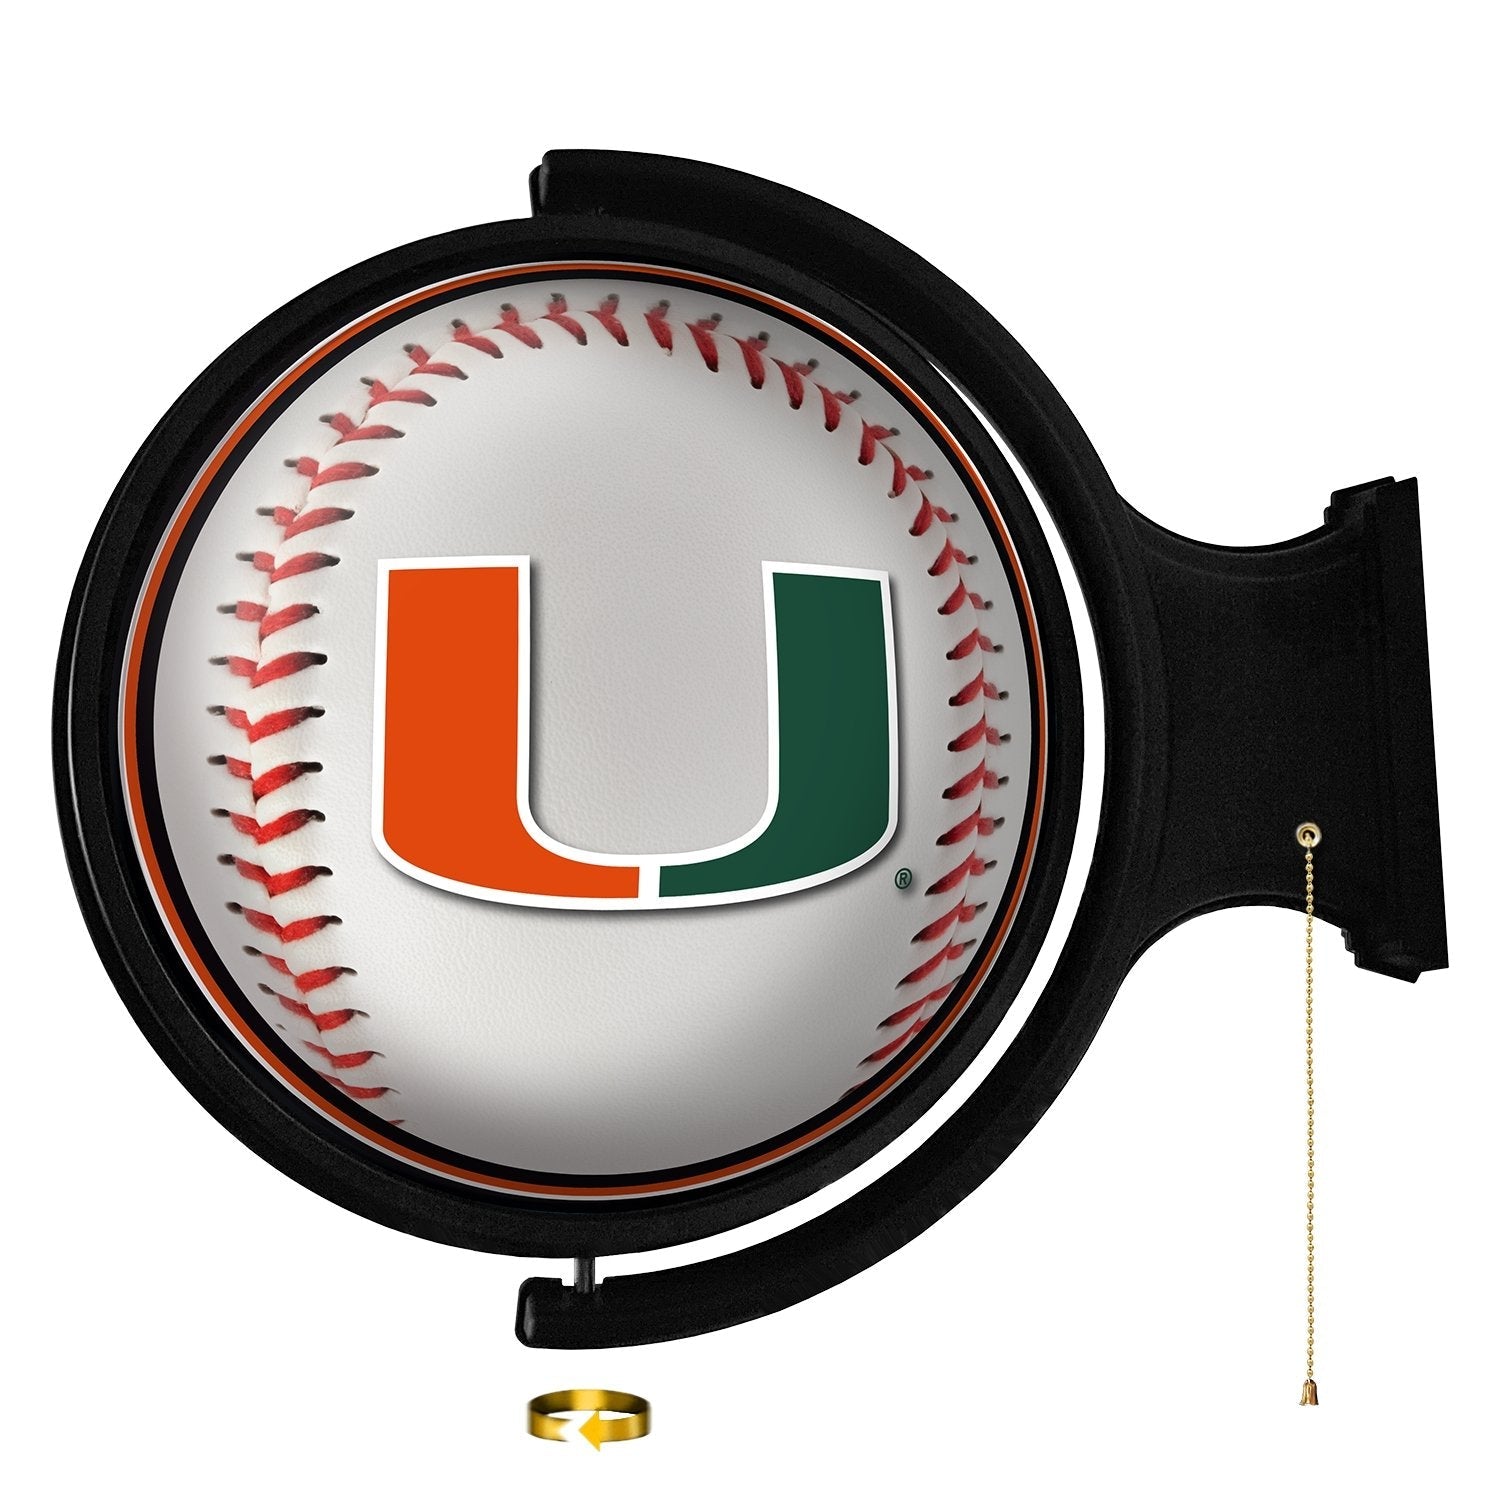 Miami Hurricanes Baseball - Lighted Rotating Wall Sign - The Fan-Brand